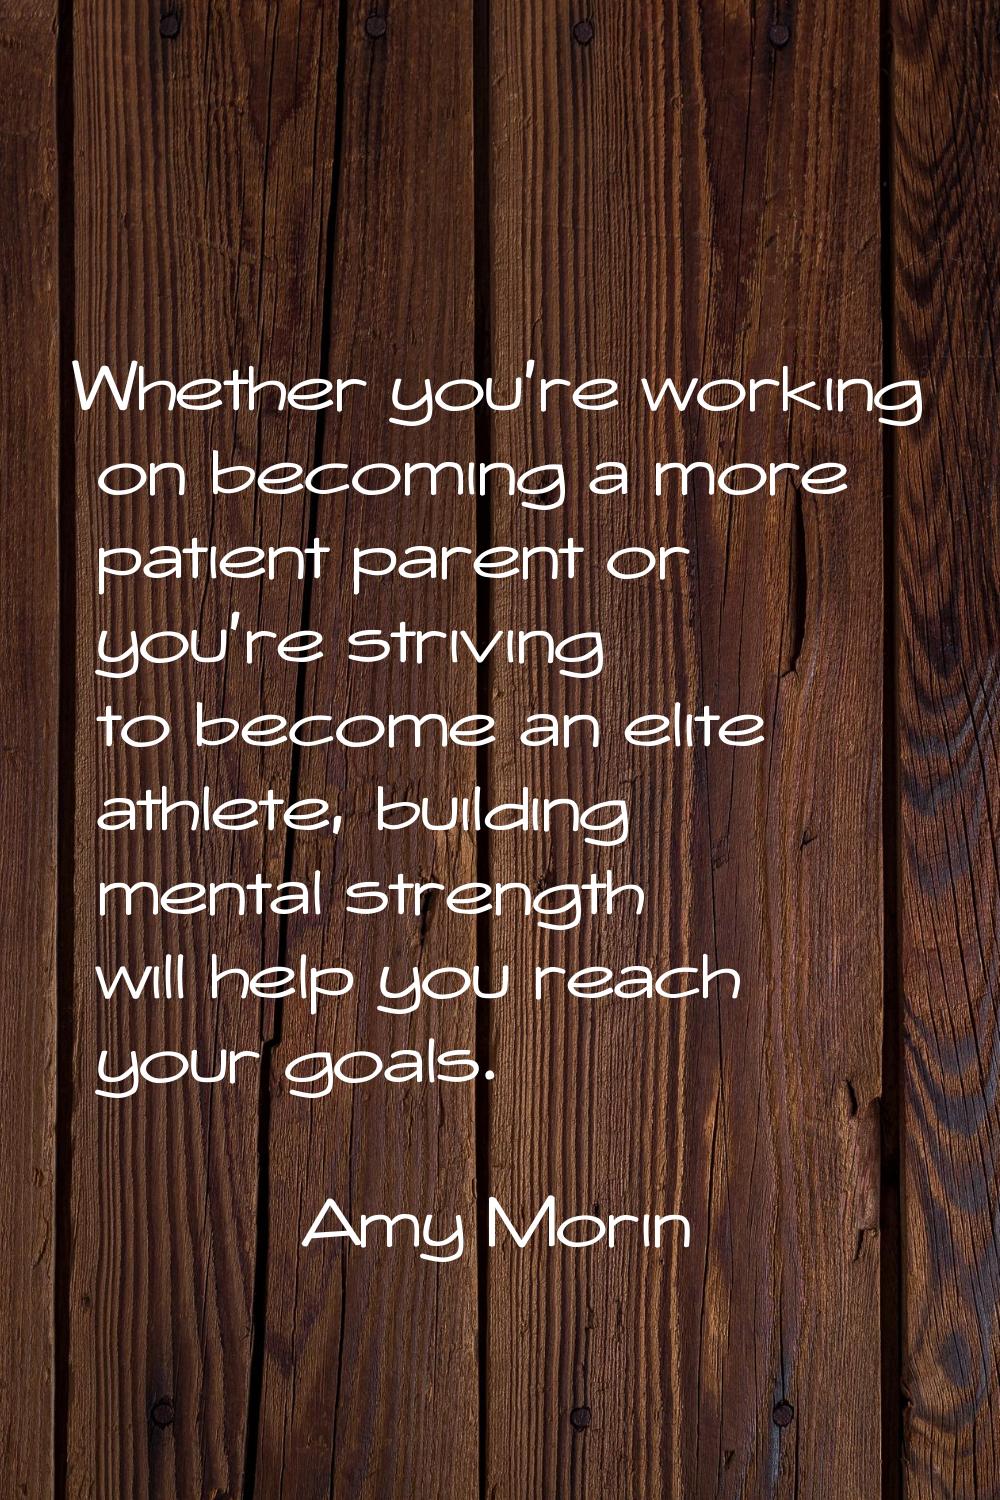 Whether you're working on becoming a more patient parent or you're striving to become an elite athl